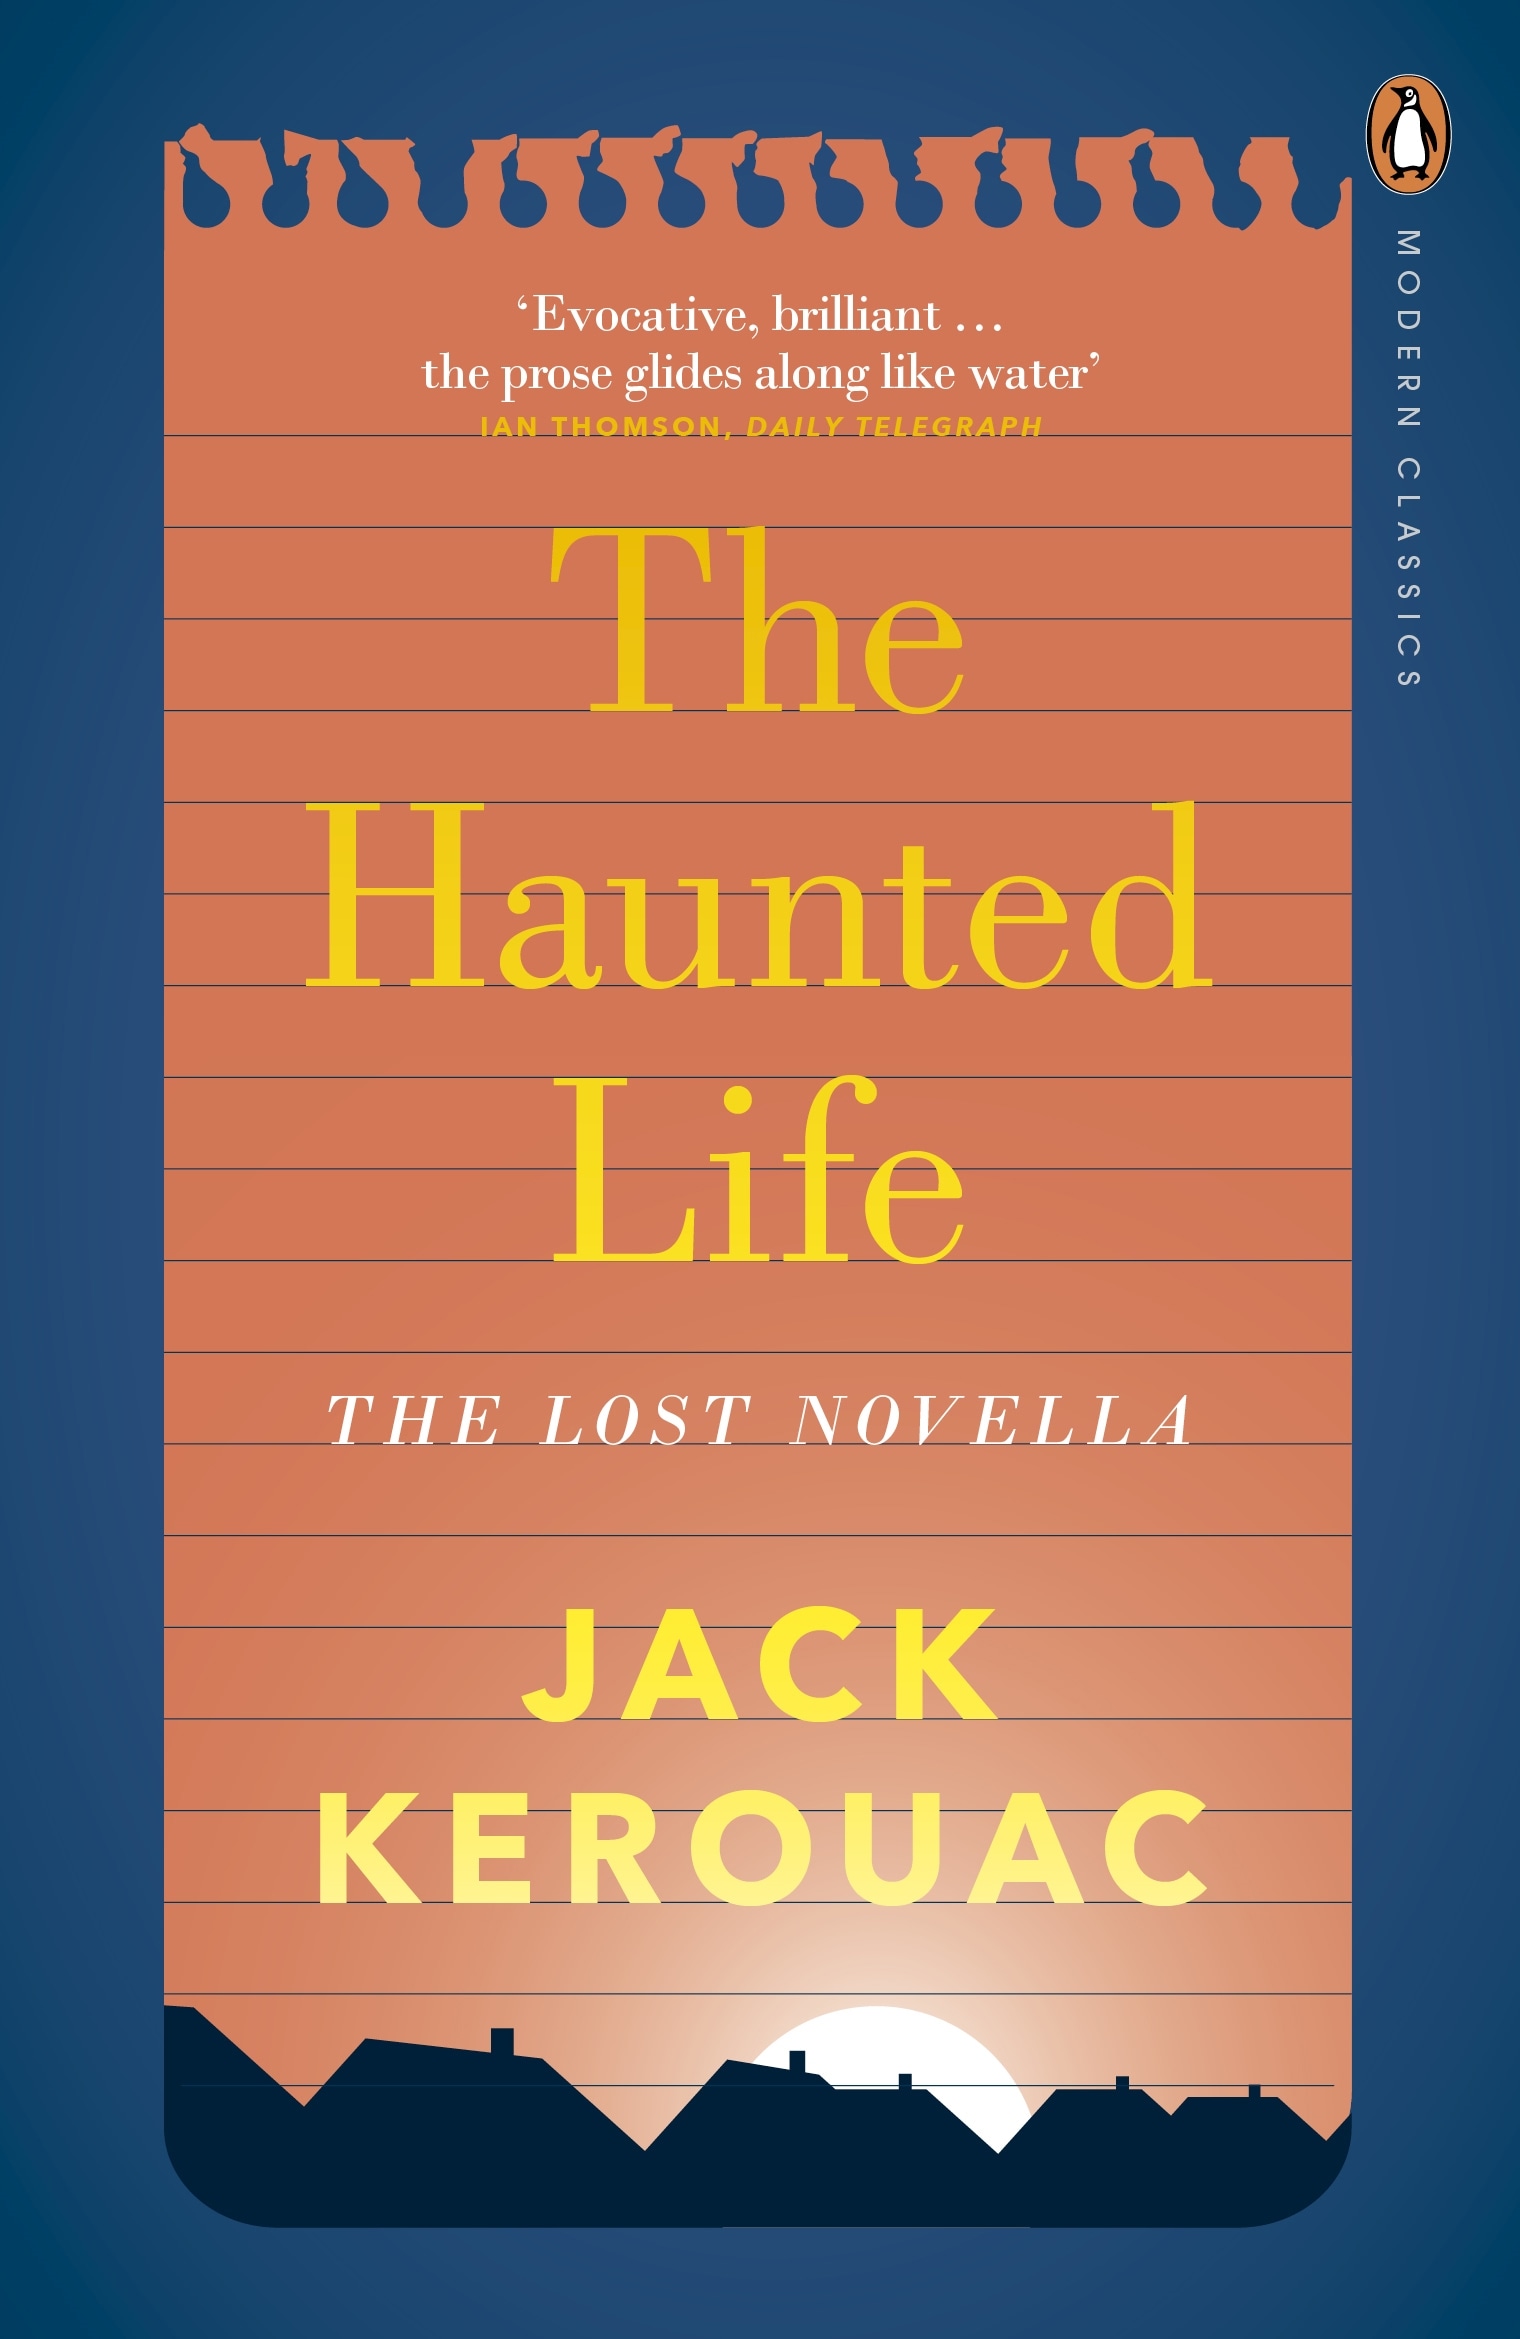 Book “The Haunted Life” by Jack Kerouac — April 30, 2015